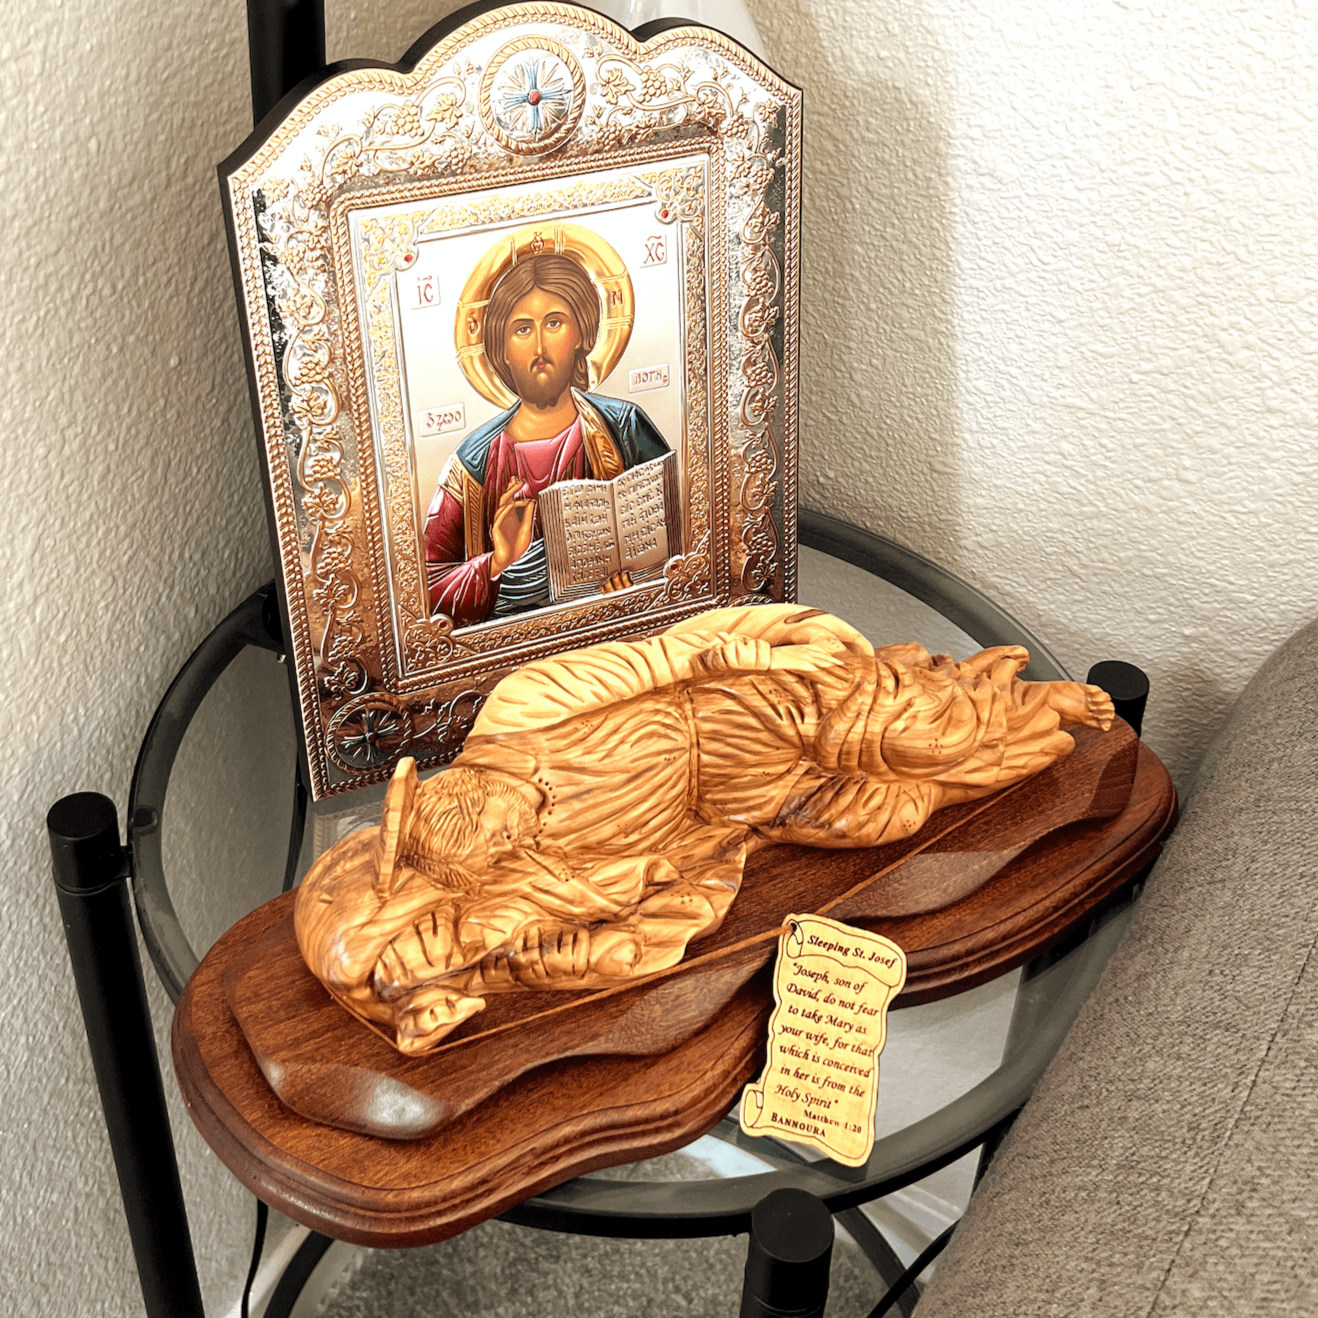 Saint Joesph Sleeping Wooden Carving, Olive Wood from the Holy Land on Mahogany Base, Masterpiece Christian and Biblical Inspired Sculpture 